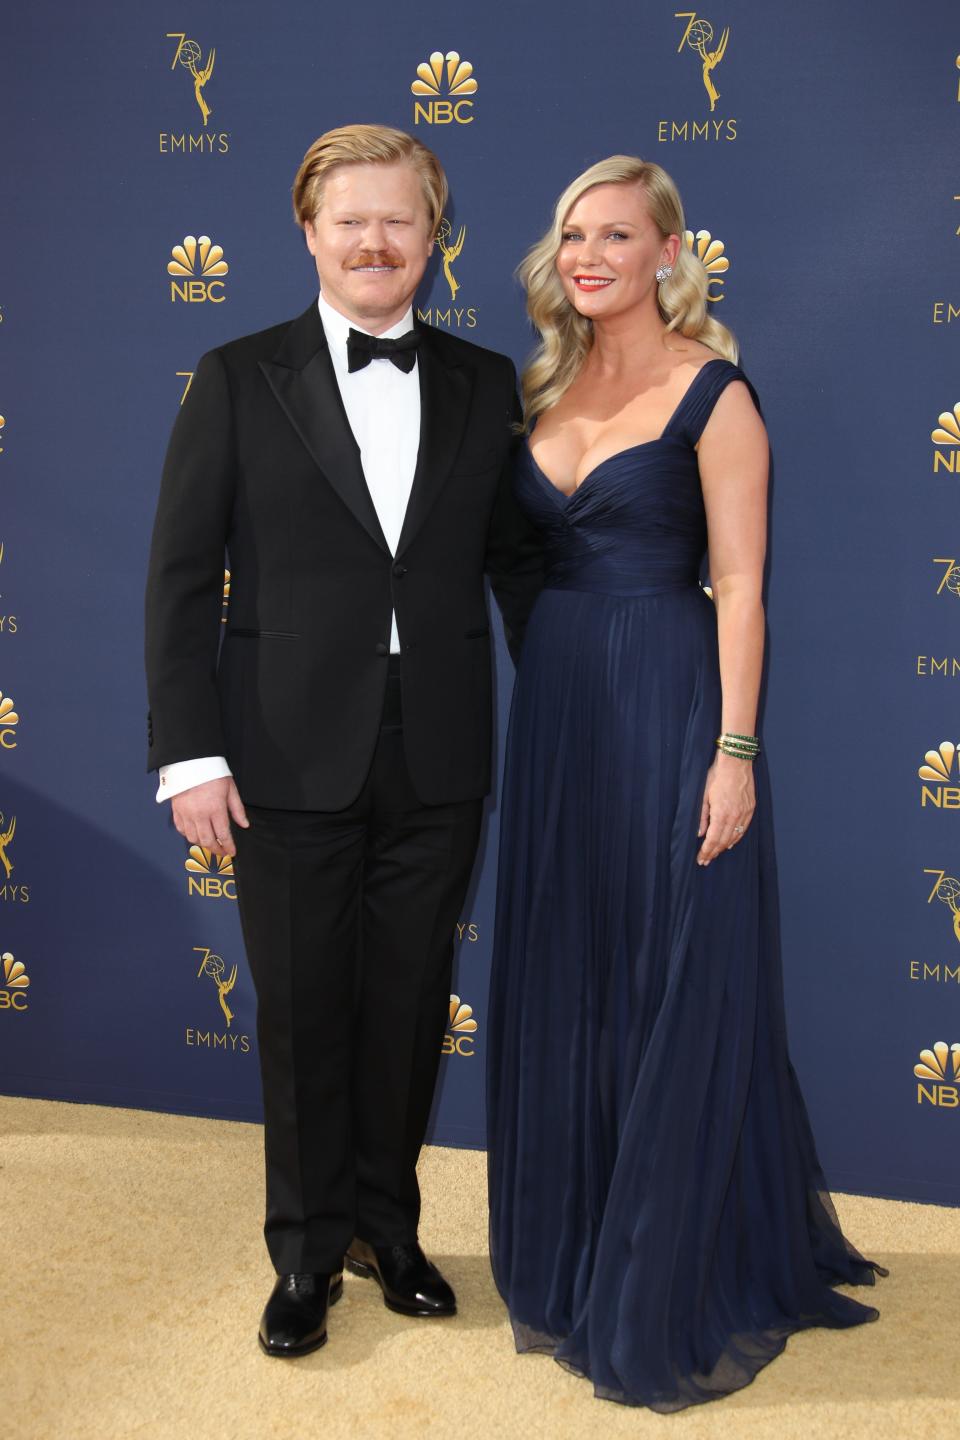 Kirsten Dunst, left, says she and fiance Jesse Plemons will likely do a 